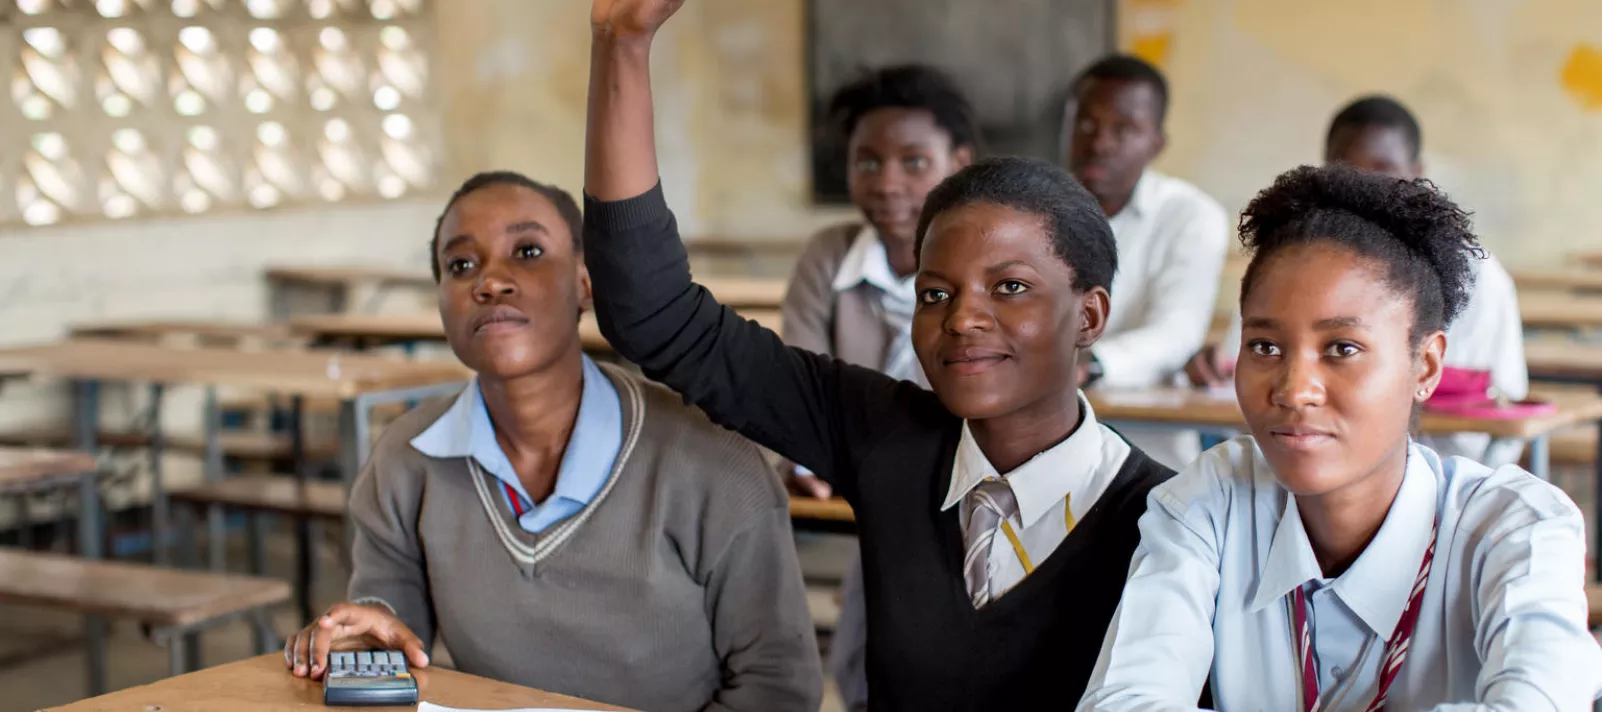 An adolescent school girl raises her hand in a classroom in Lusaka, Zambia